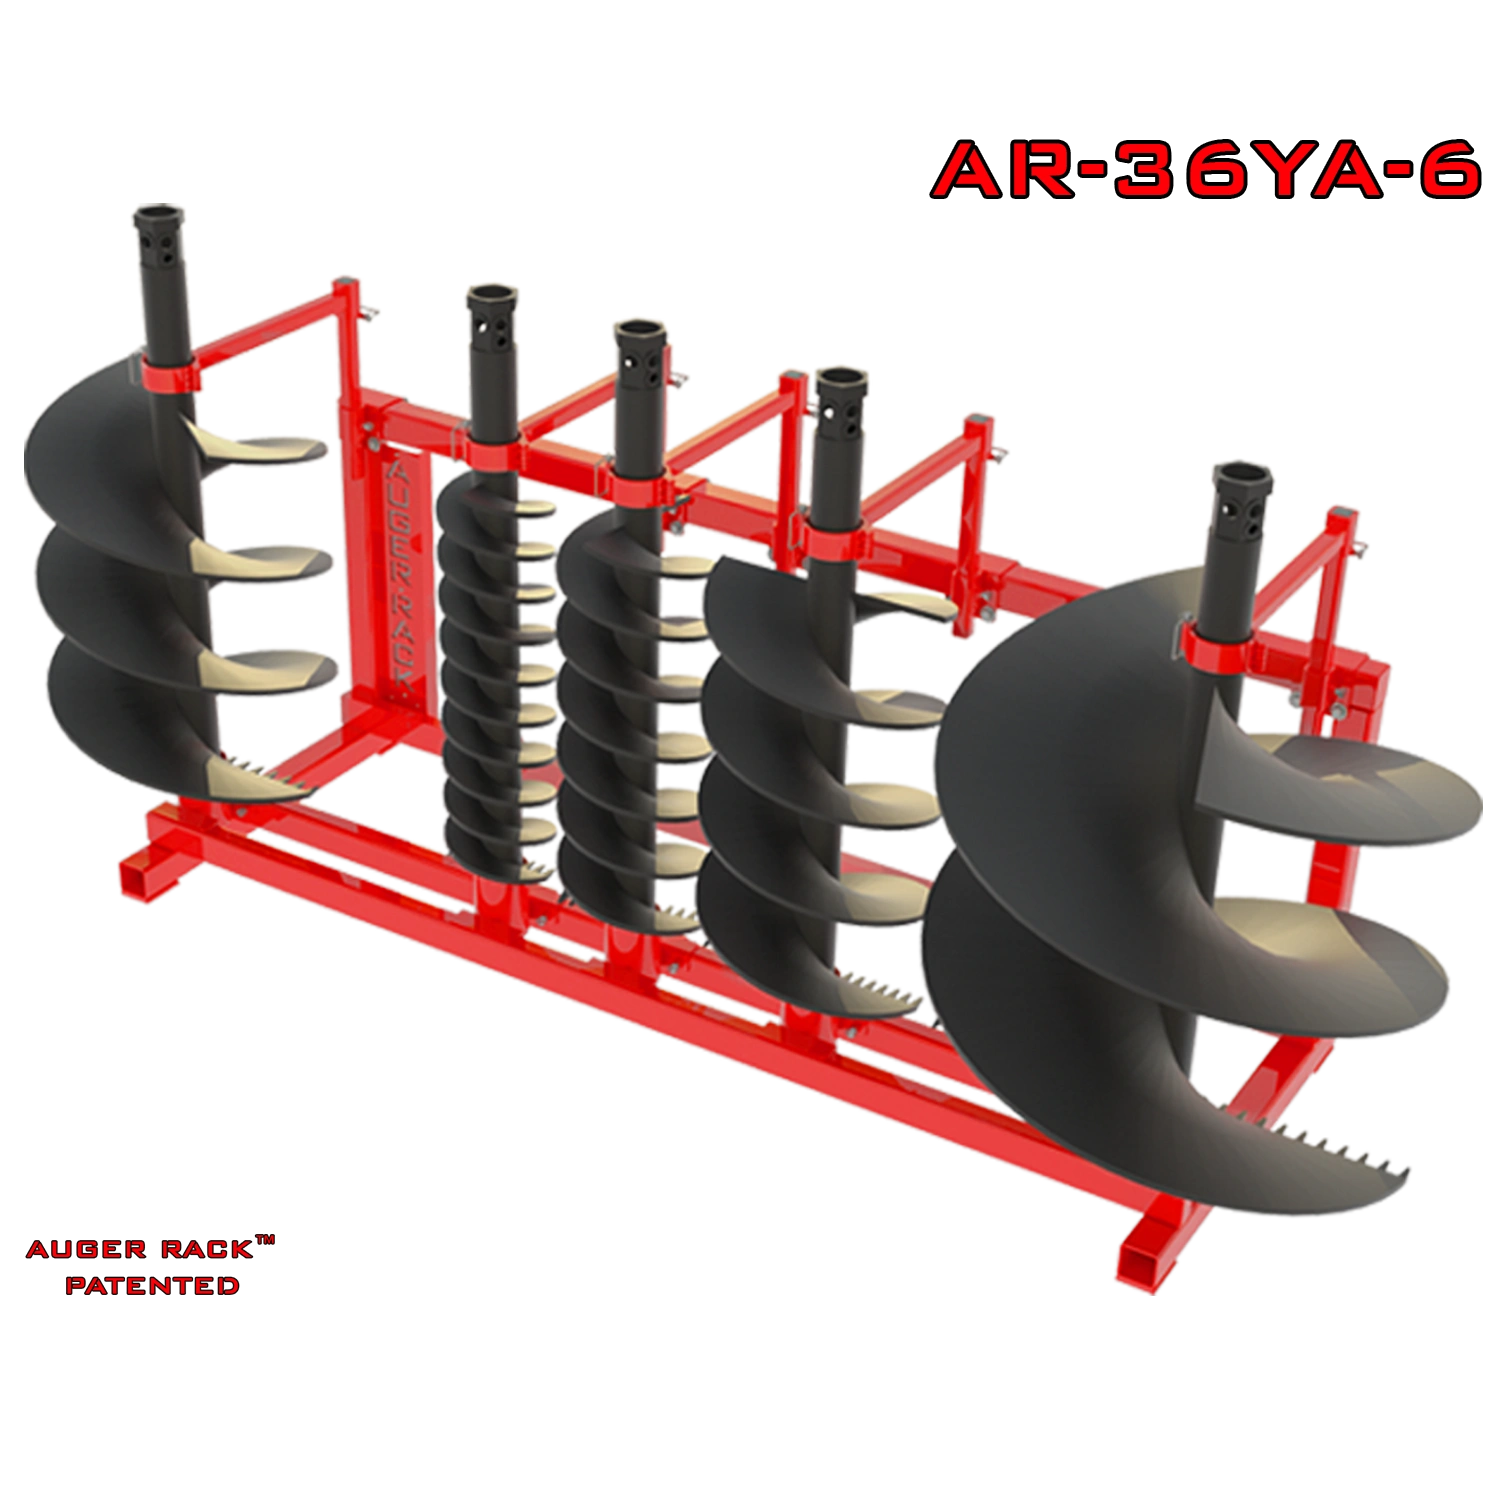 AR-36YA Mobile Auger Rack for storage of 36" and smaller augers